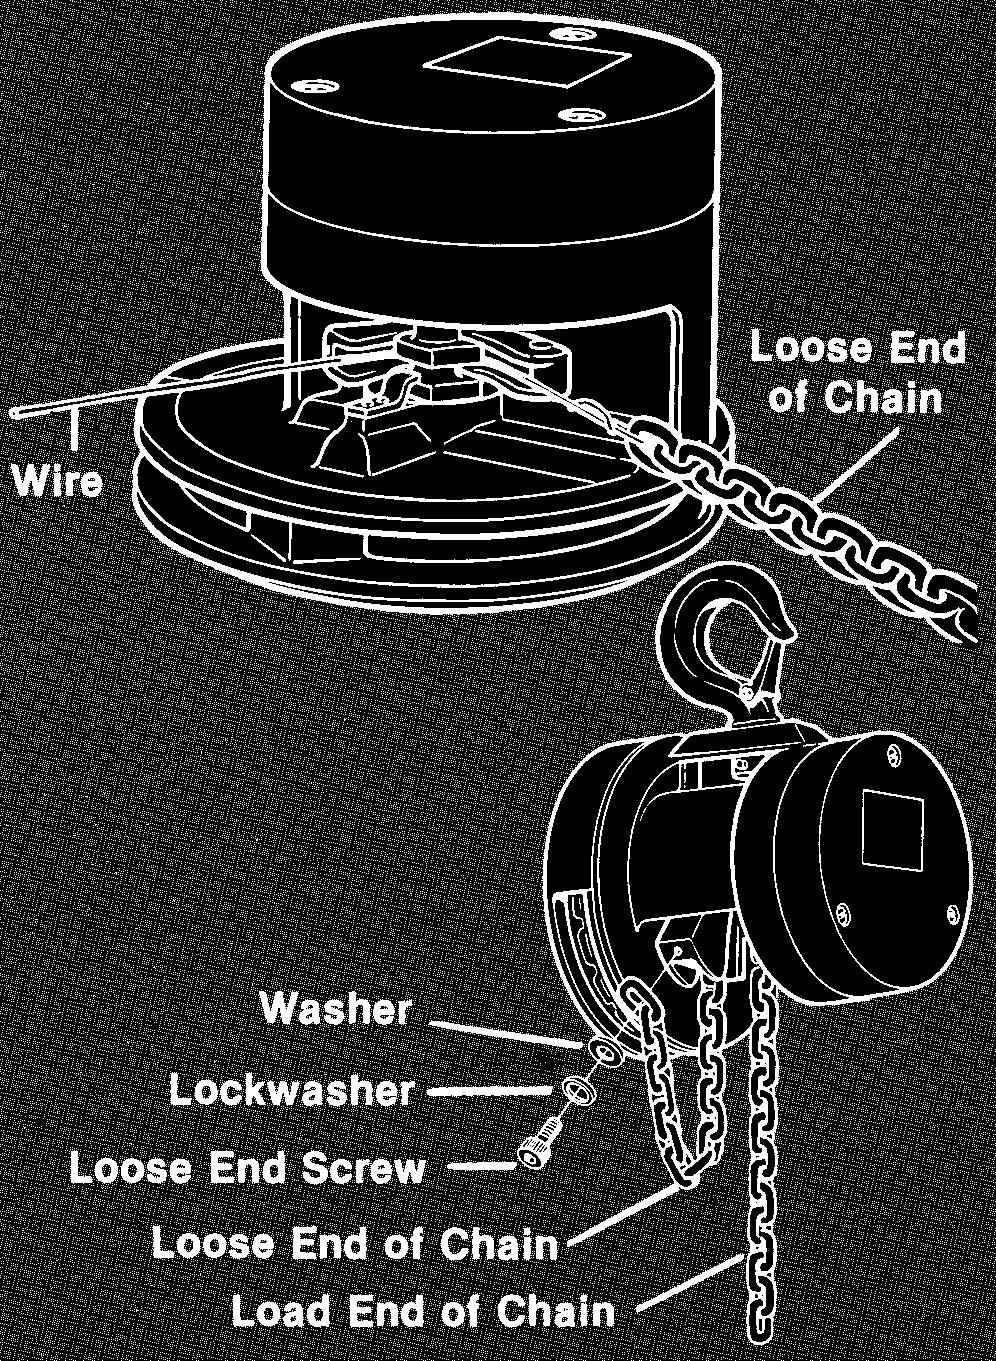 REEVING Improper installation (reeving) of the load chain can result in a dropped load. Reeve and attach the ends of the load in accordance with the following instructions.